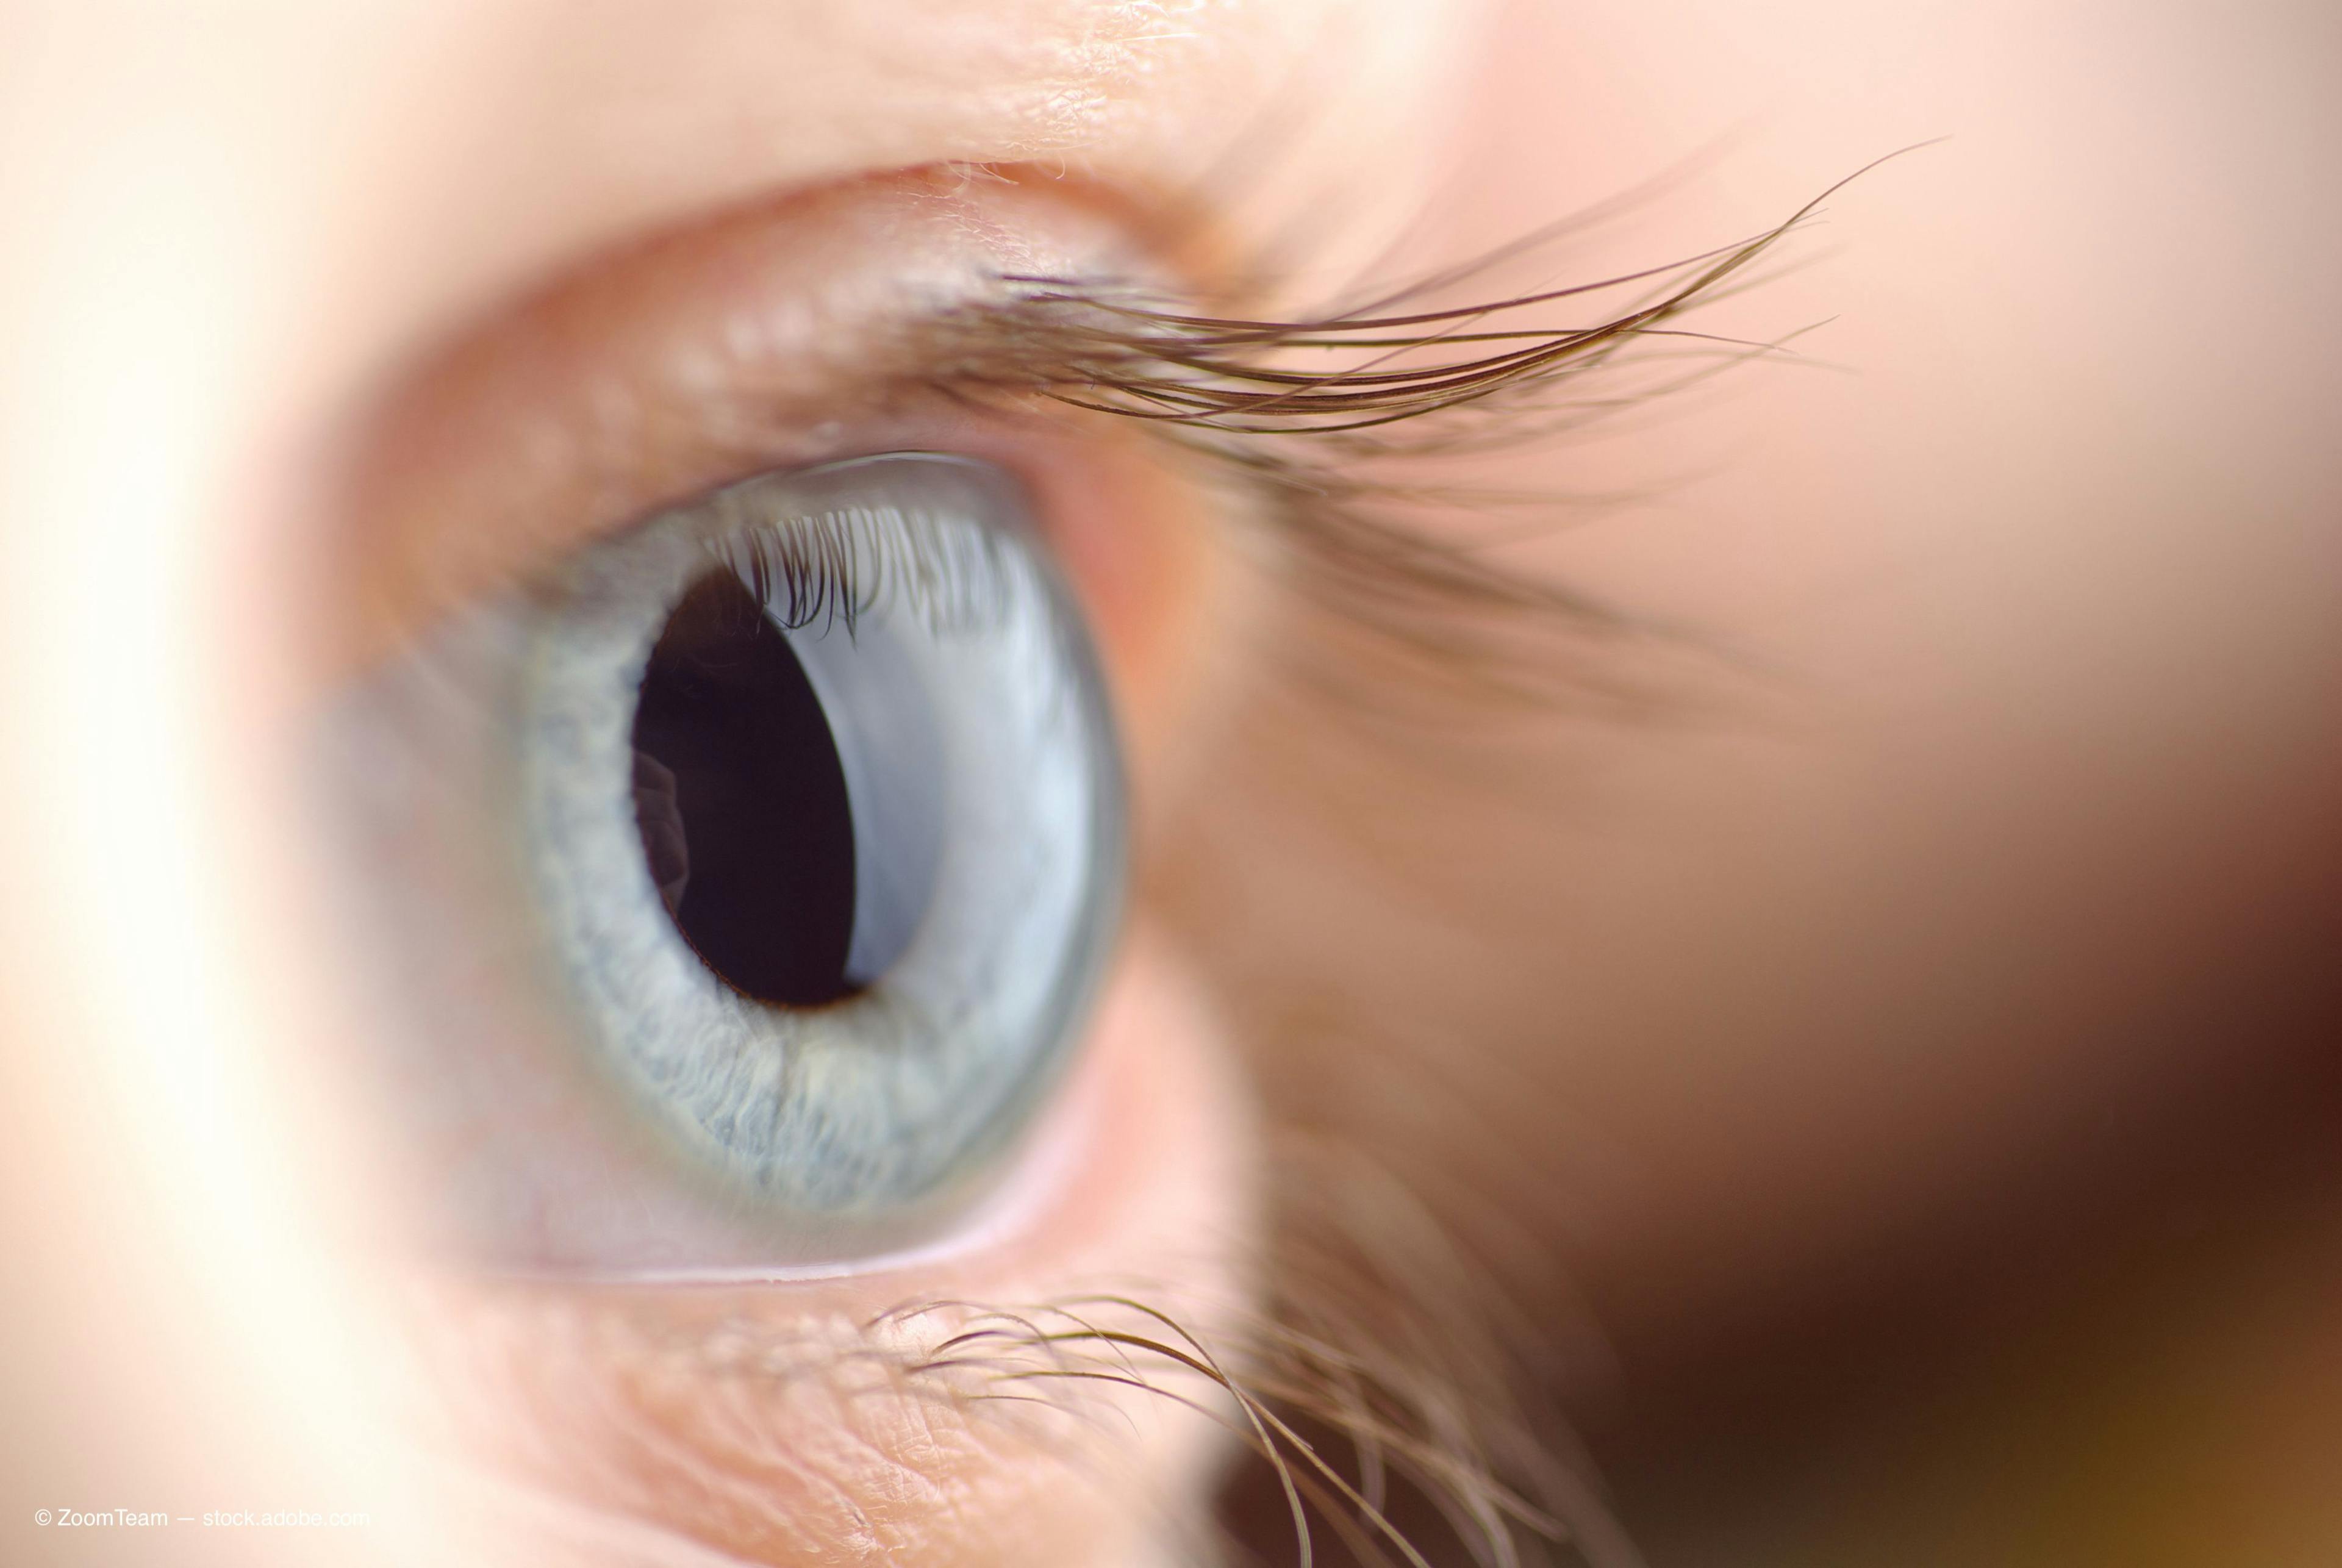 Glaukos launches phase 2 corneal health clinical program for iLink therapy